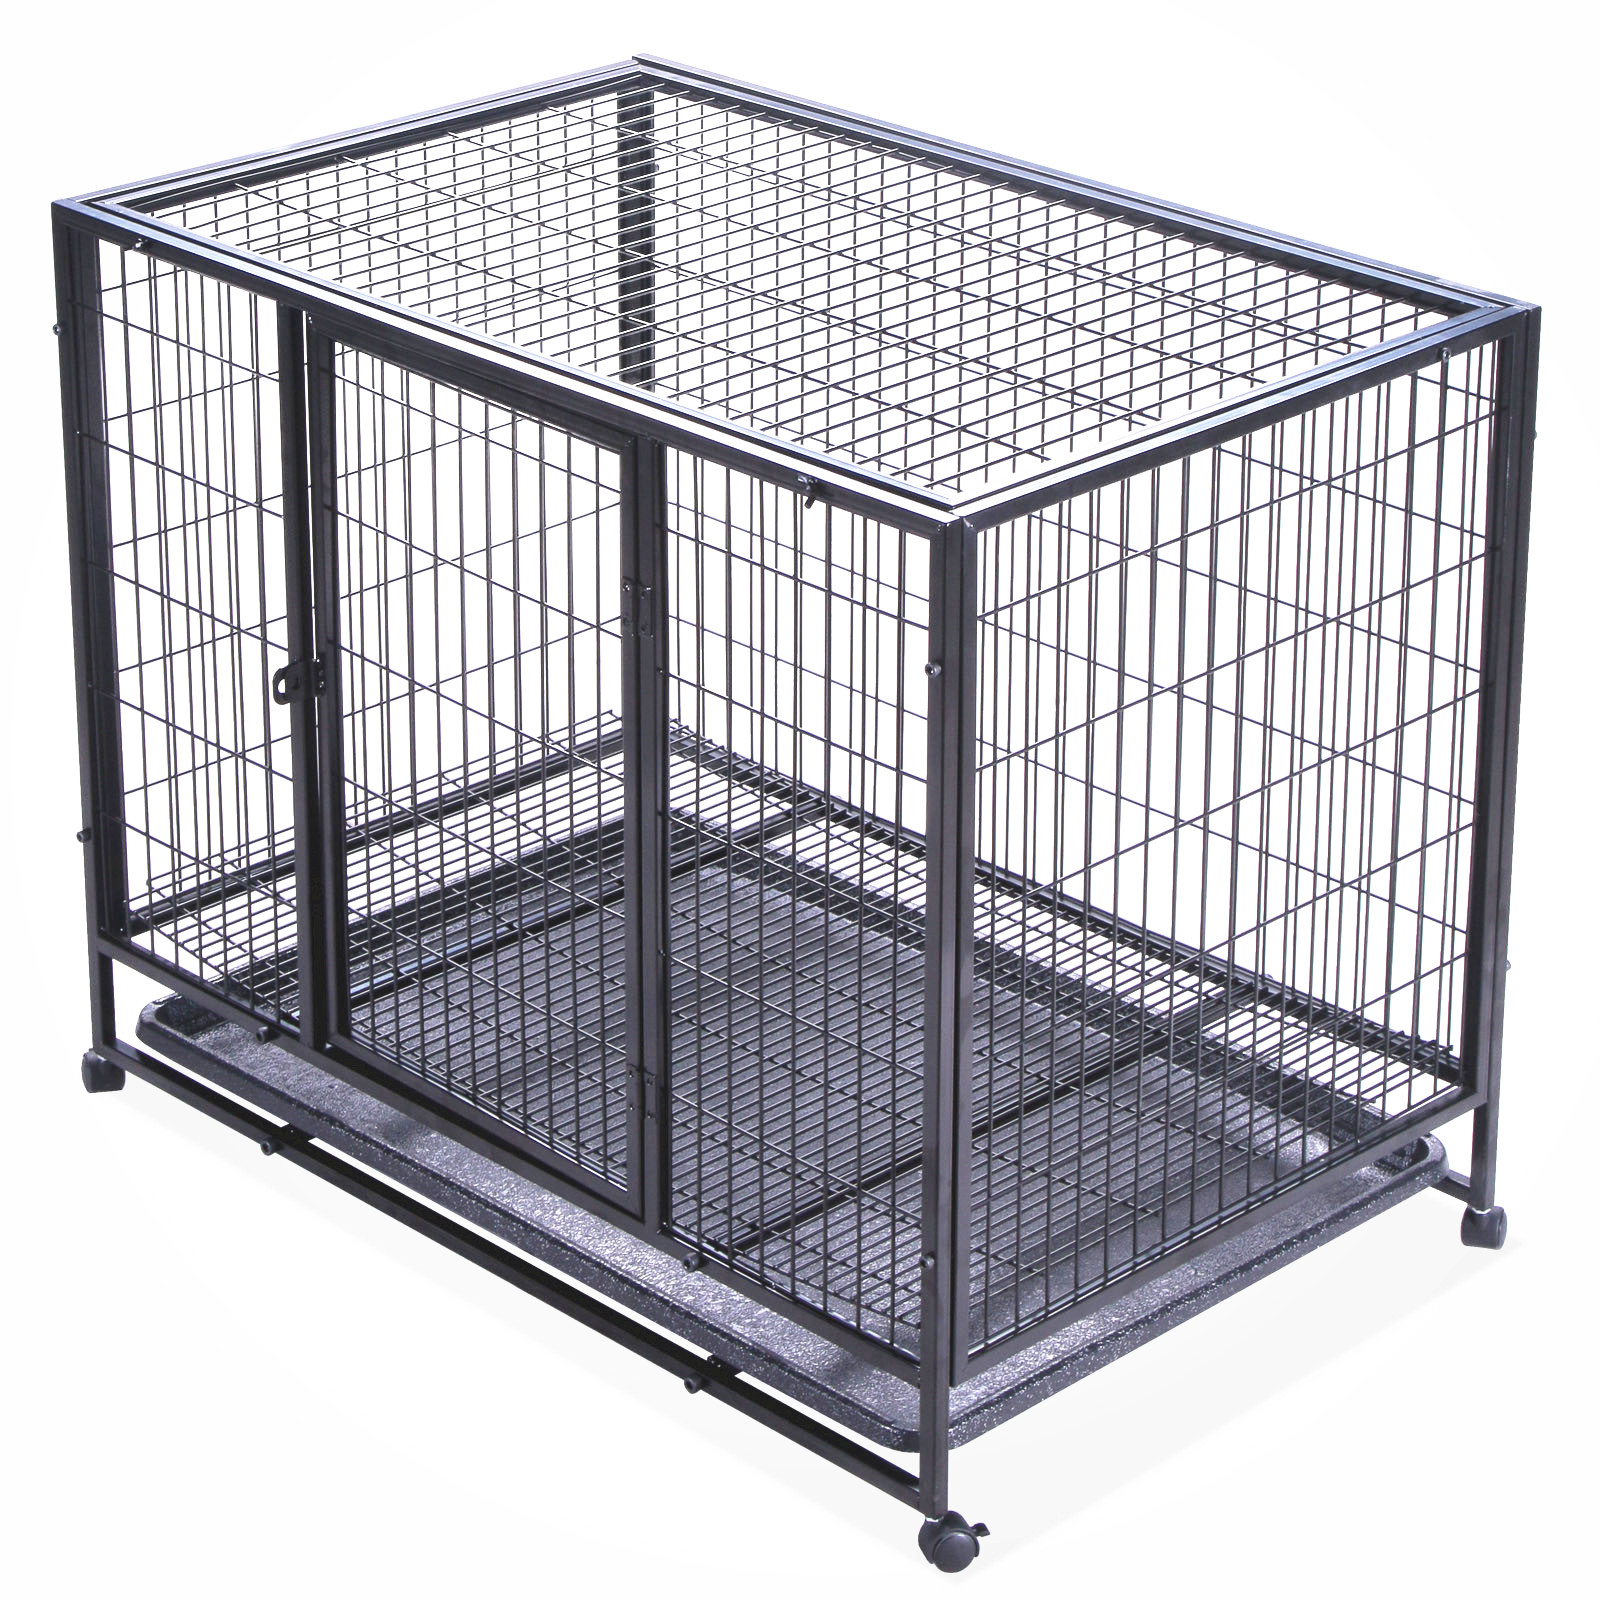 37" Dog Kennel w Wheels Portable Pet Puppy Carrier Crate Cage